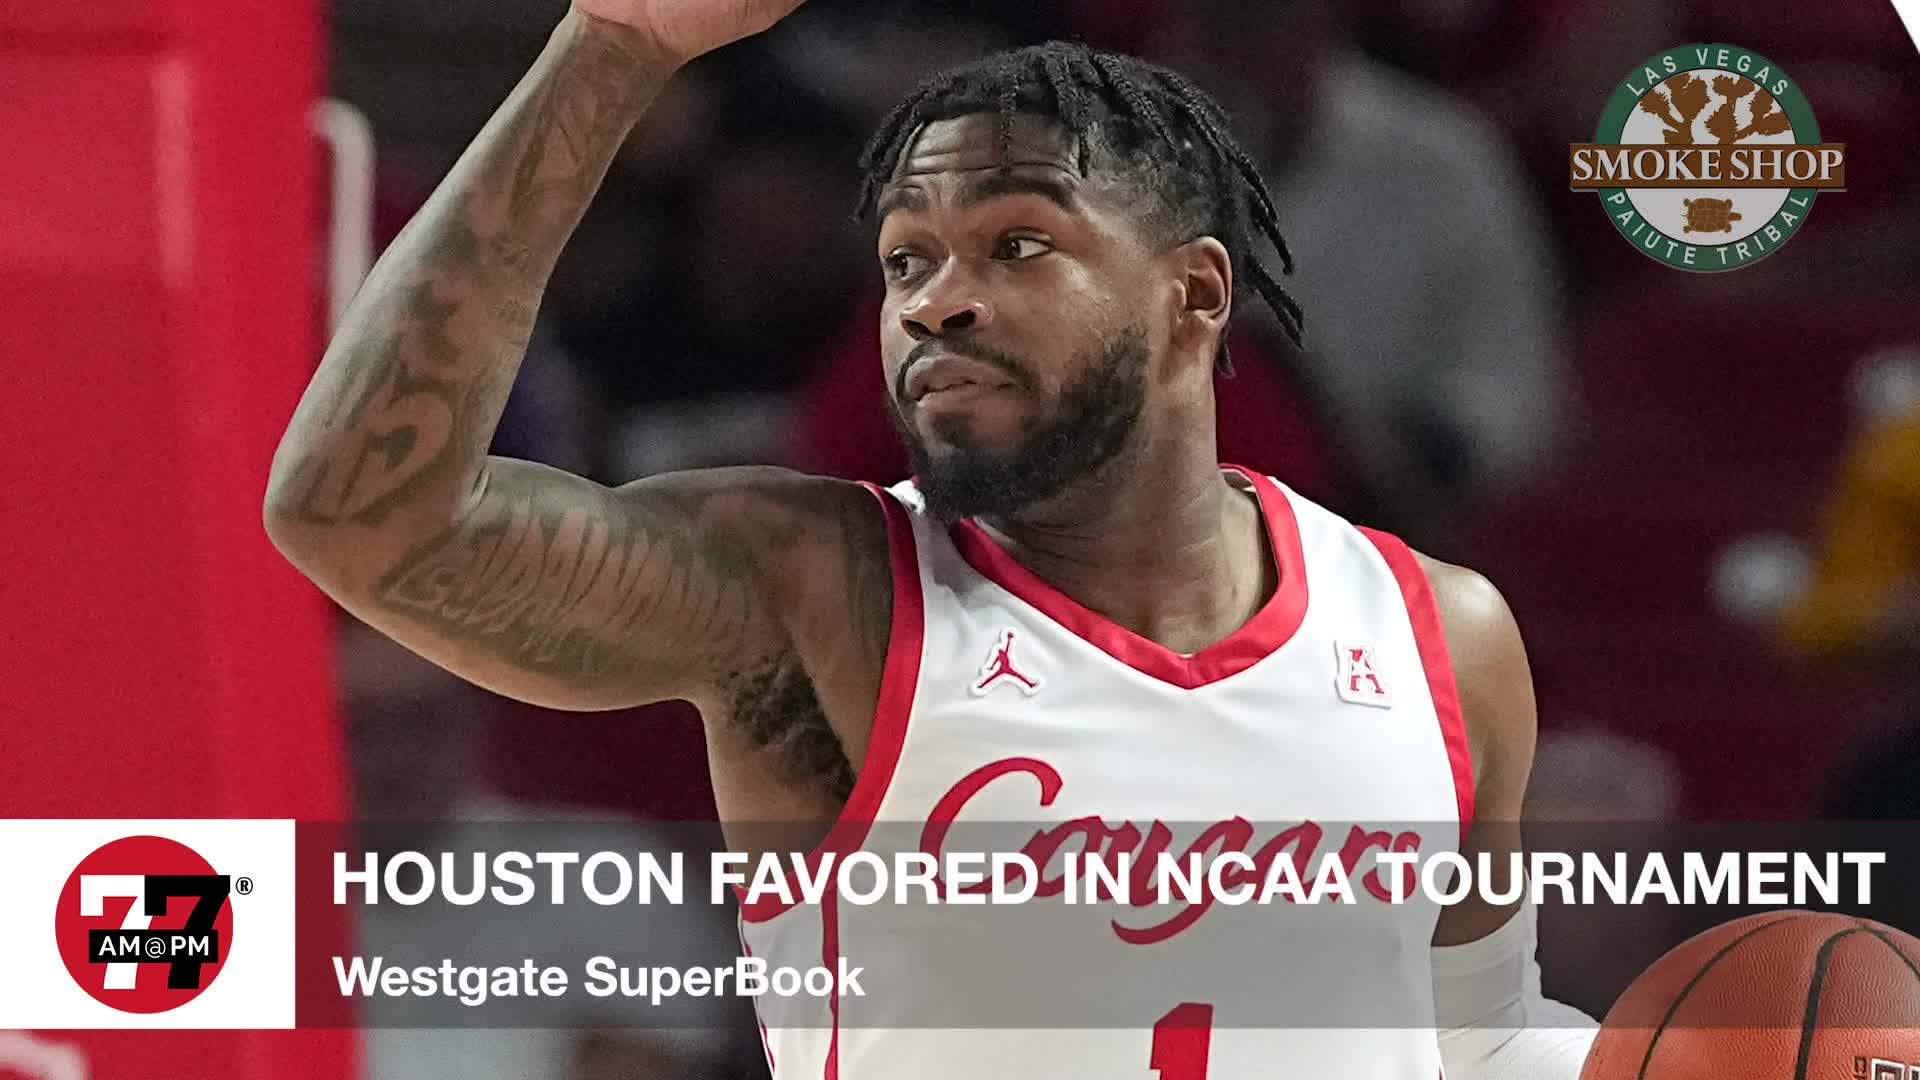 Houston favored in NCAA Tournament